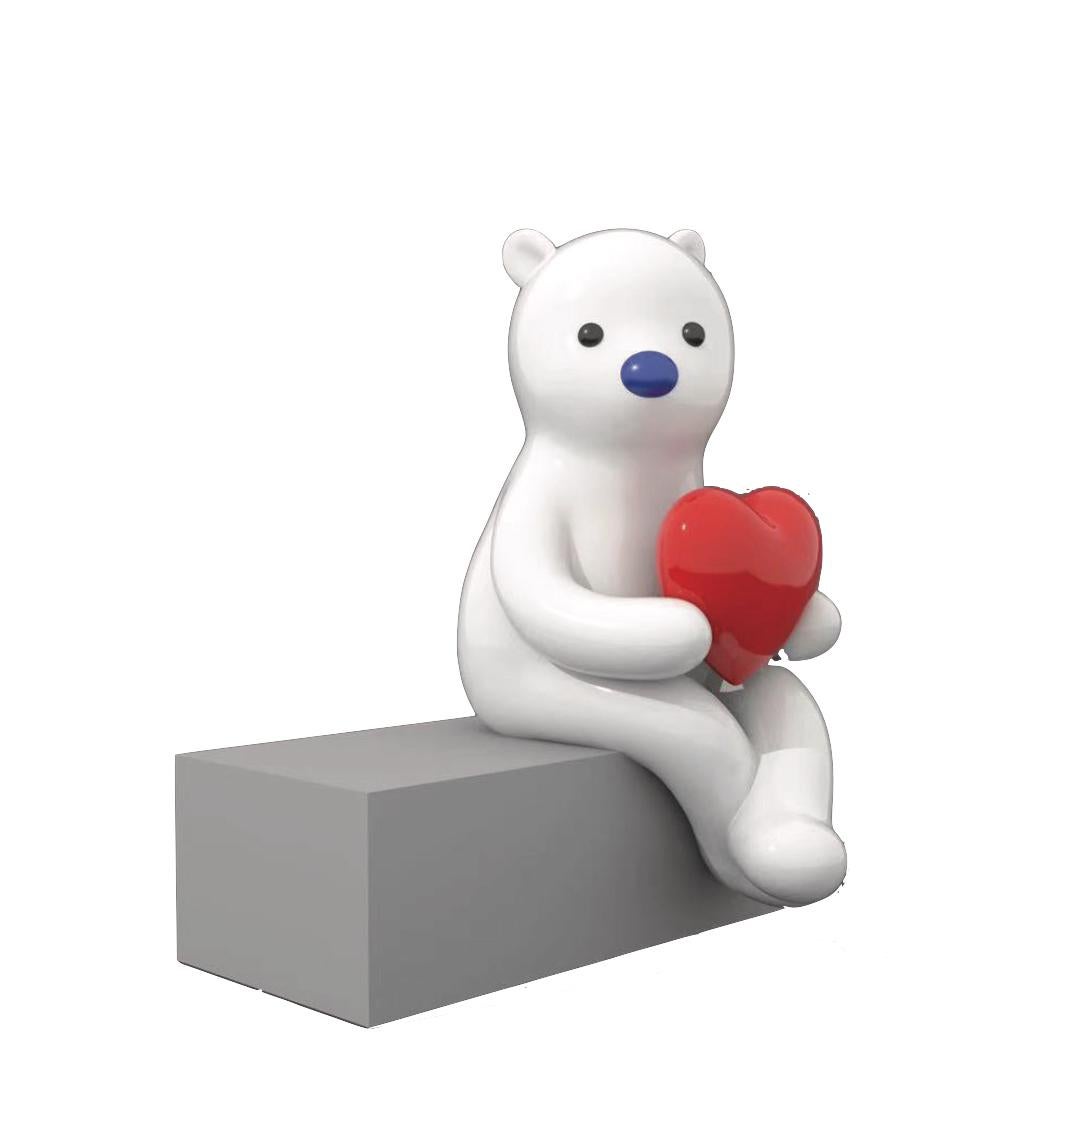 Zhang Zhanzhan Still-Life Sculpture - White Bear with A Red Heart Shape Toy Life Size Out Door